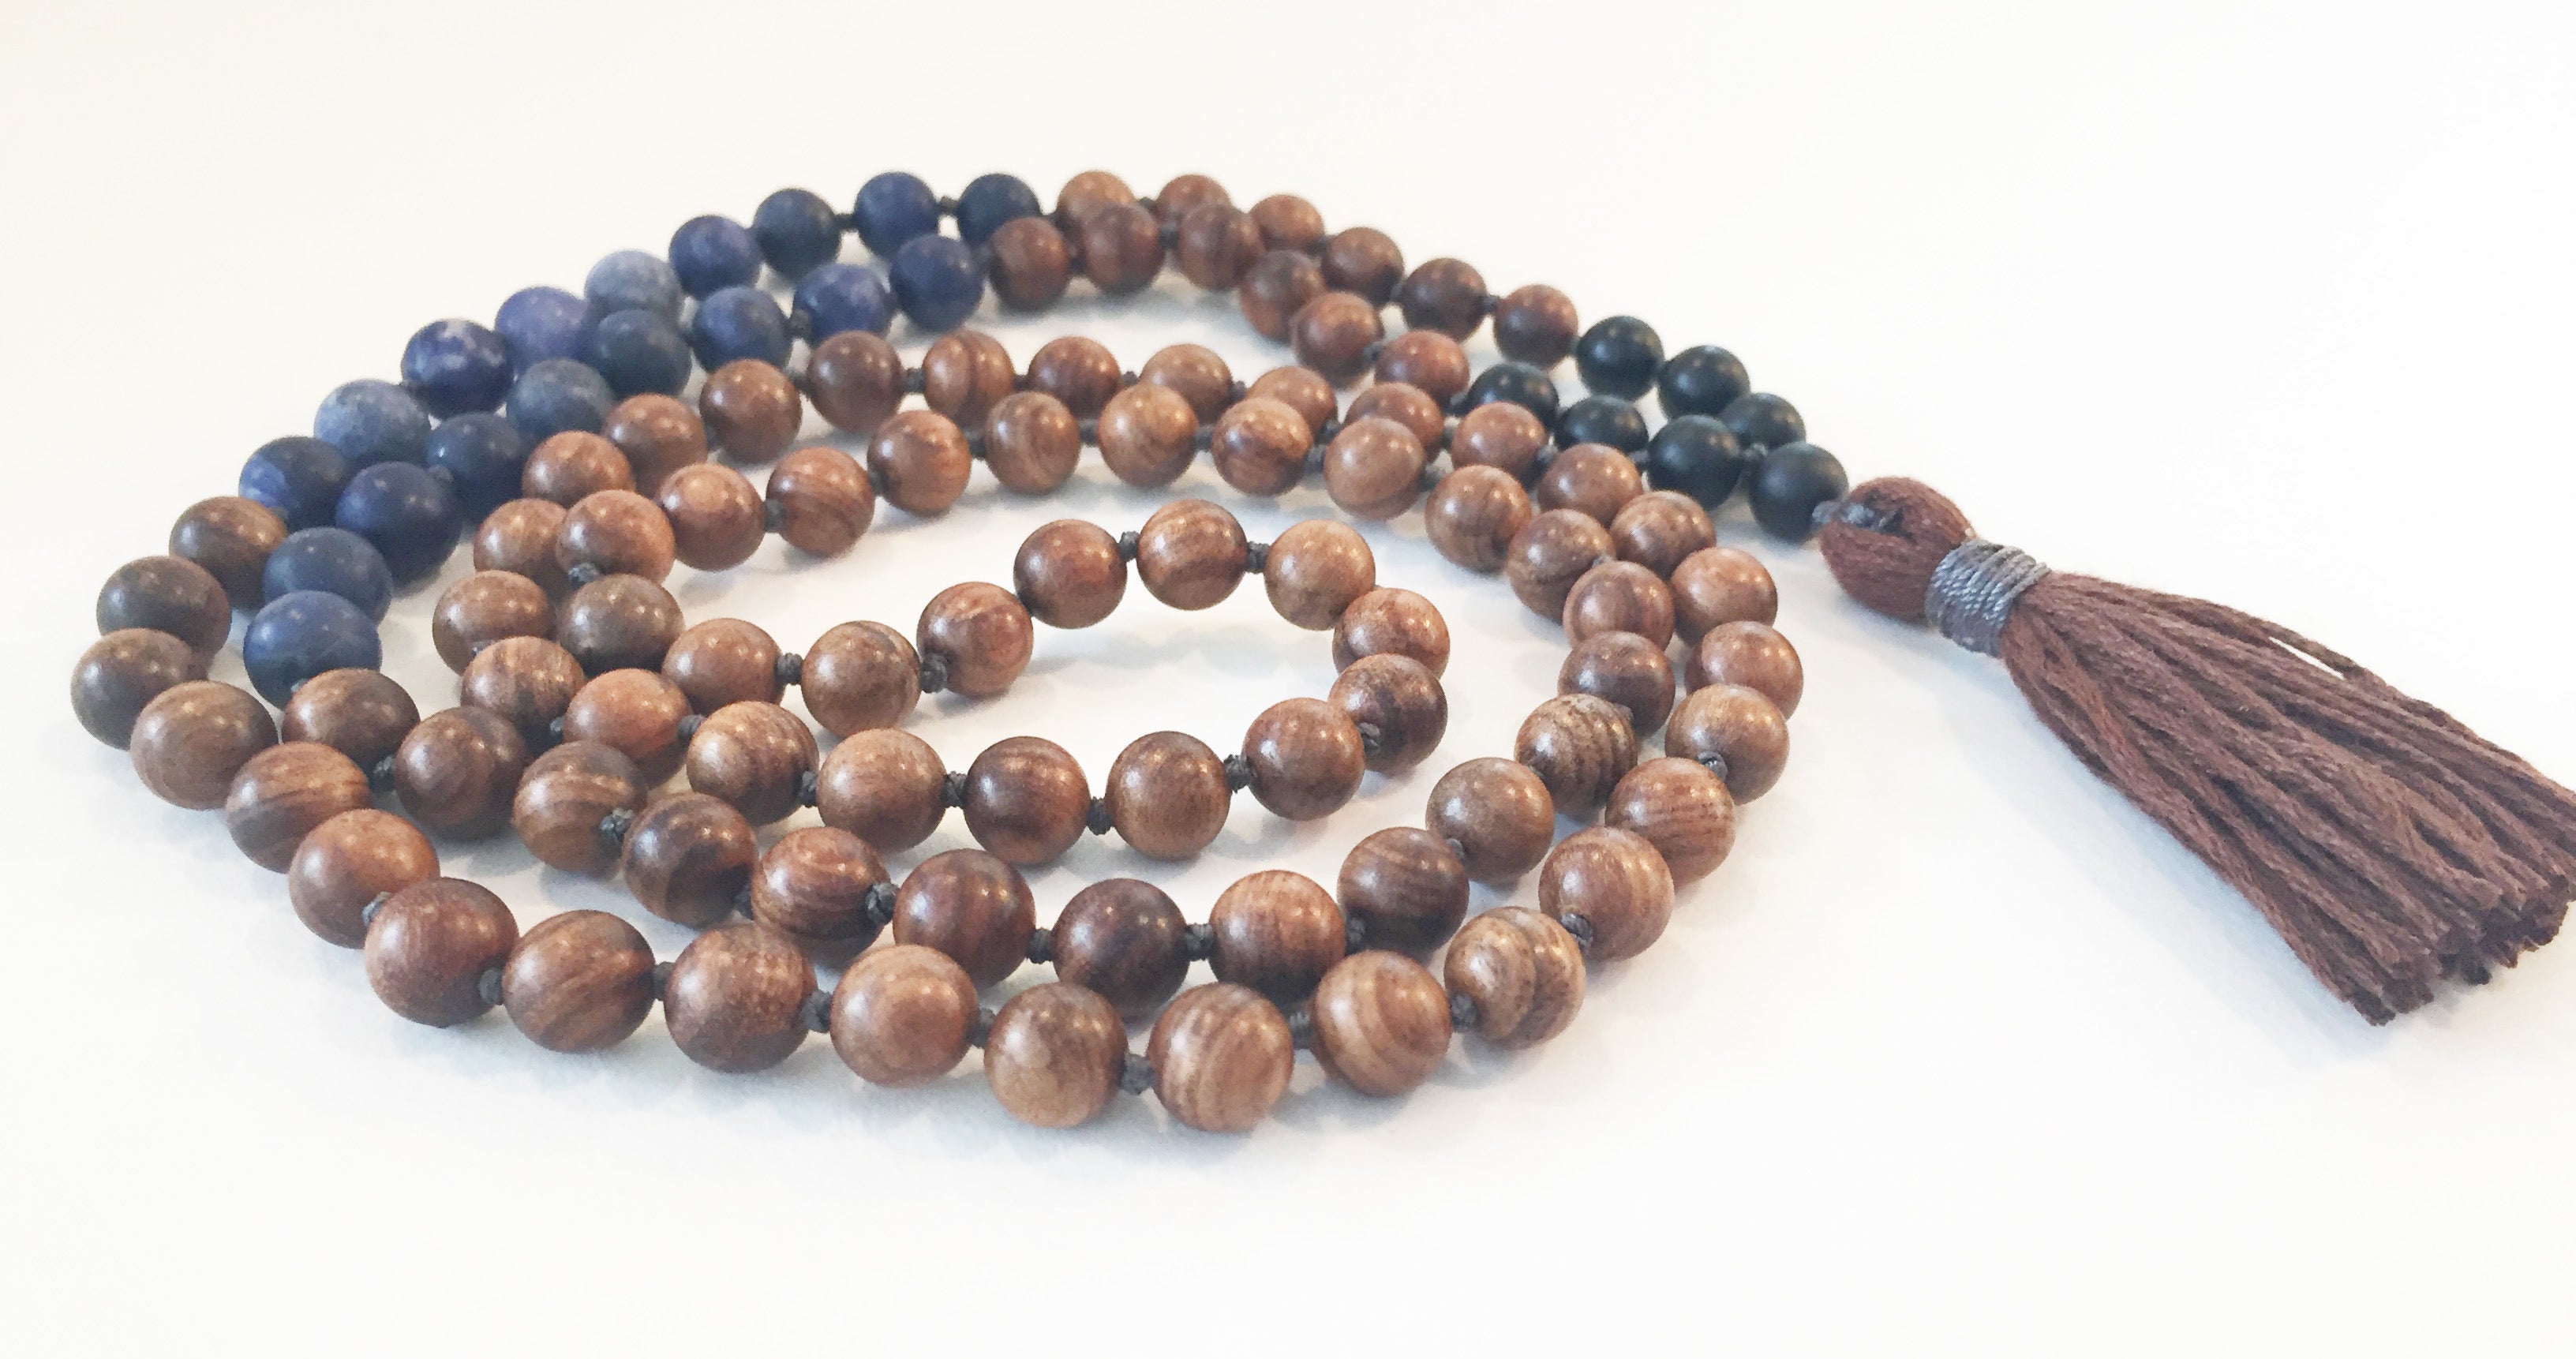 8mm Pear Wood & Matte Sodalite 108 Knotted Mala Necklace with Colored Tassel